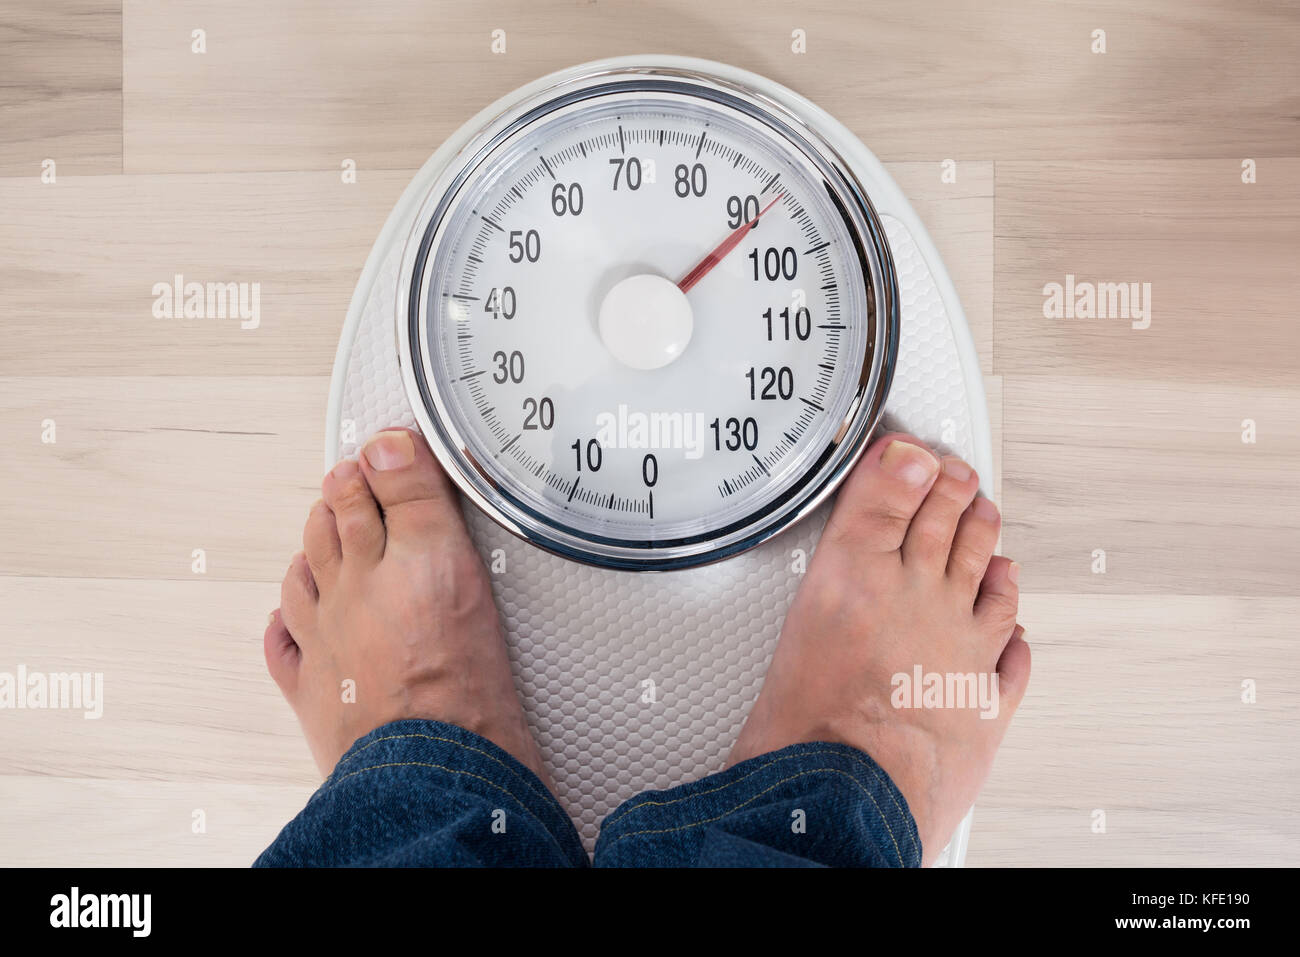 https://c8.alamy.com/comp/KFE190/low-section-of-a-person-standing-on-weighing-scale-KFE190.jpg